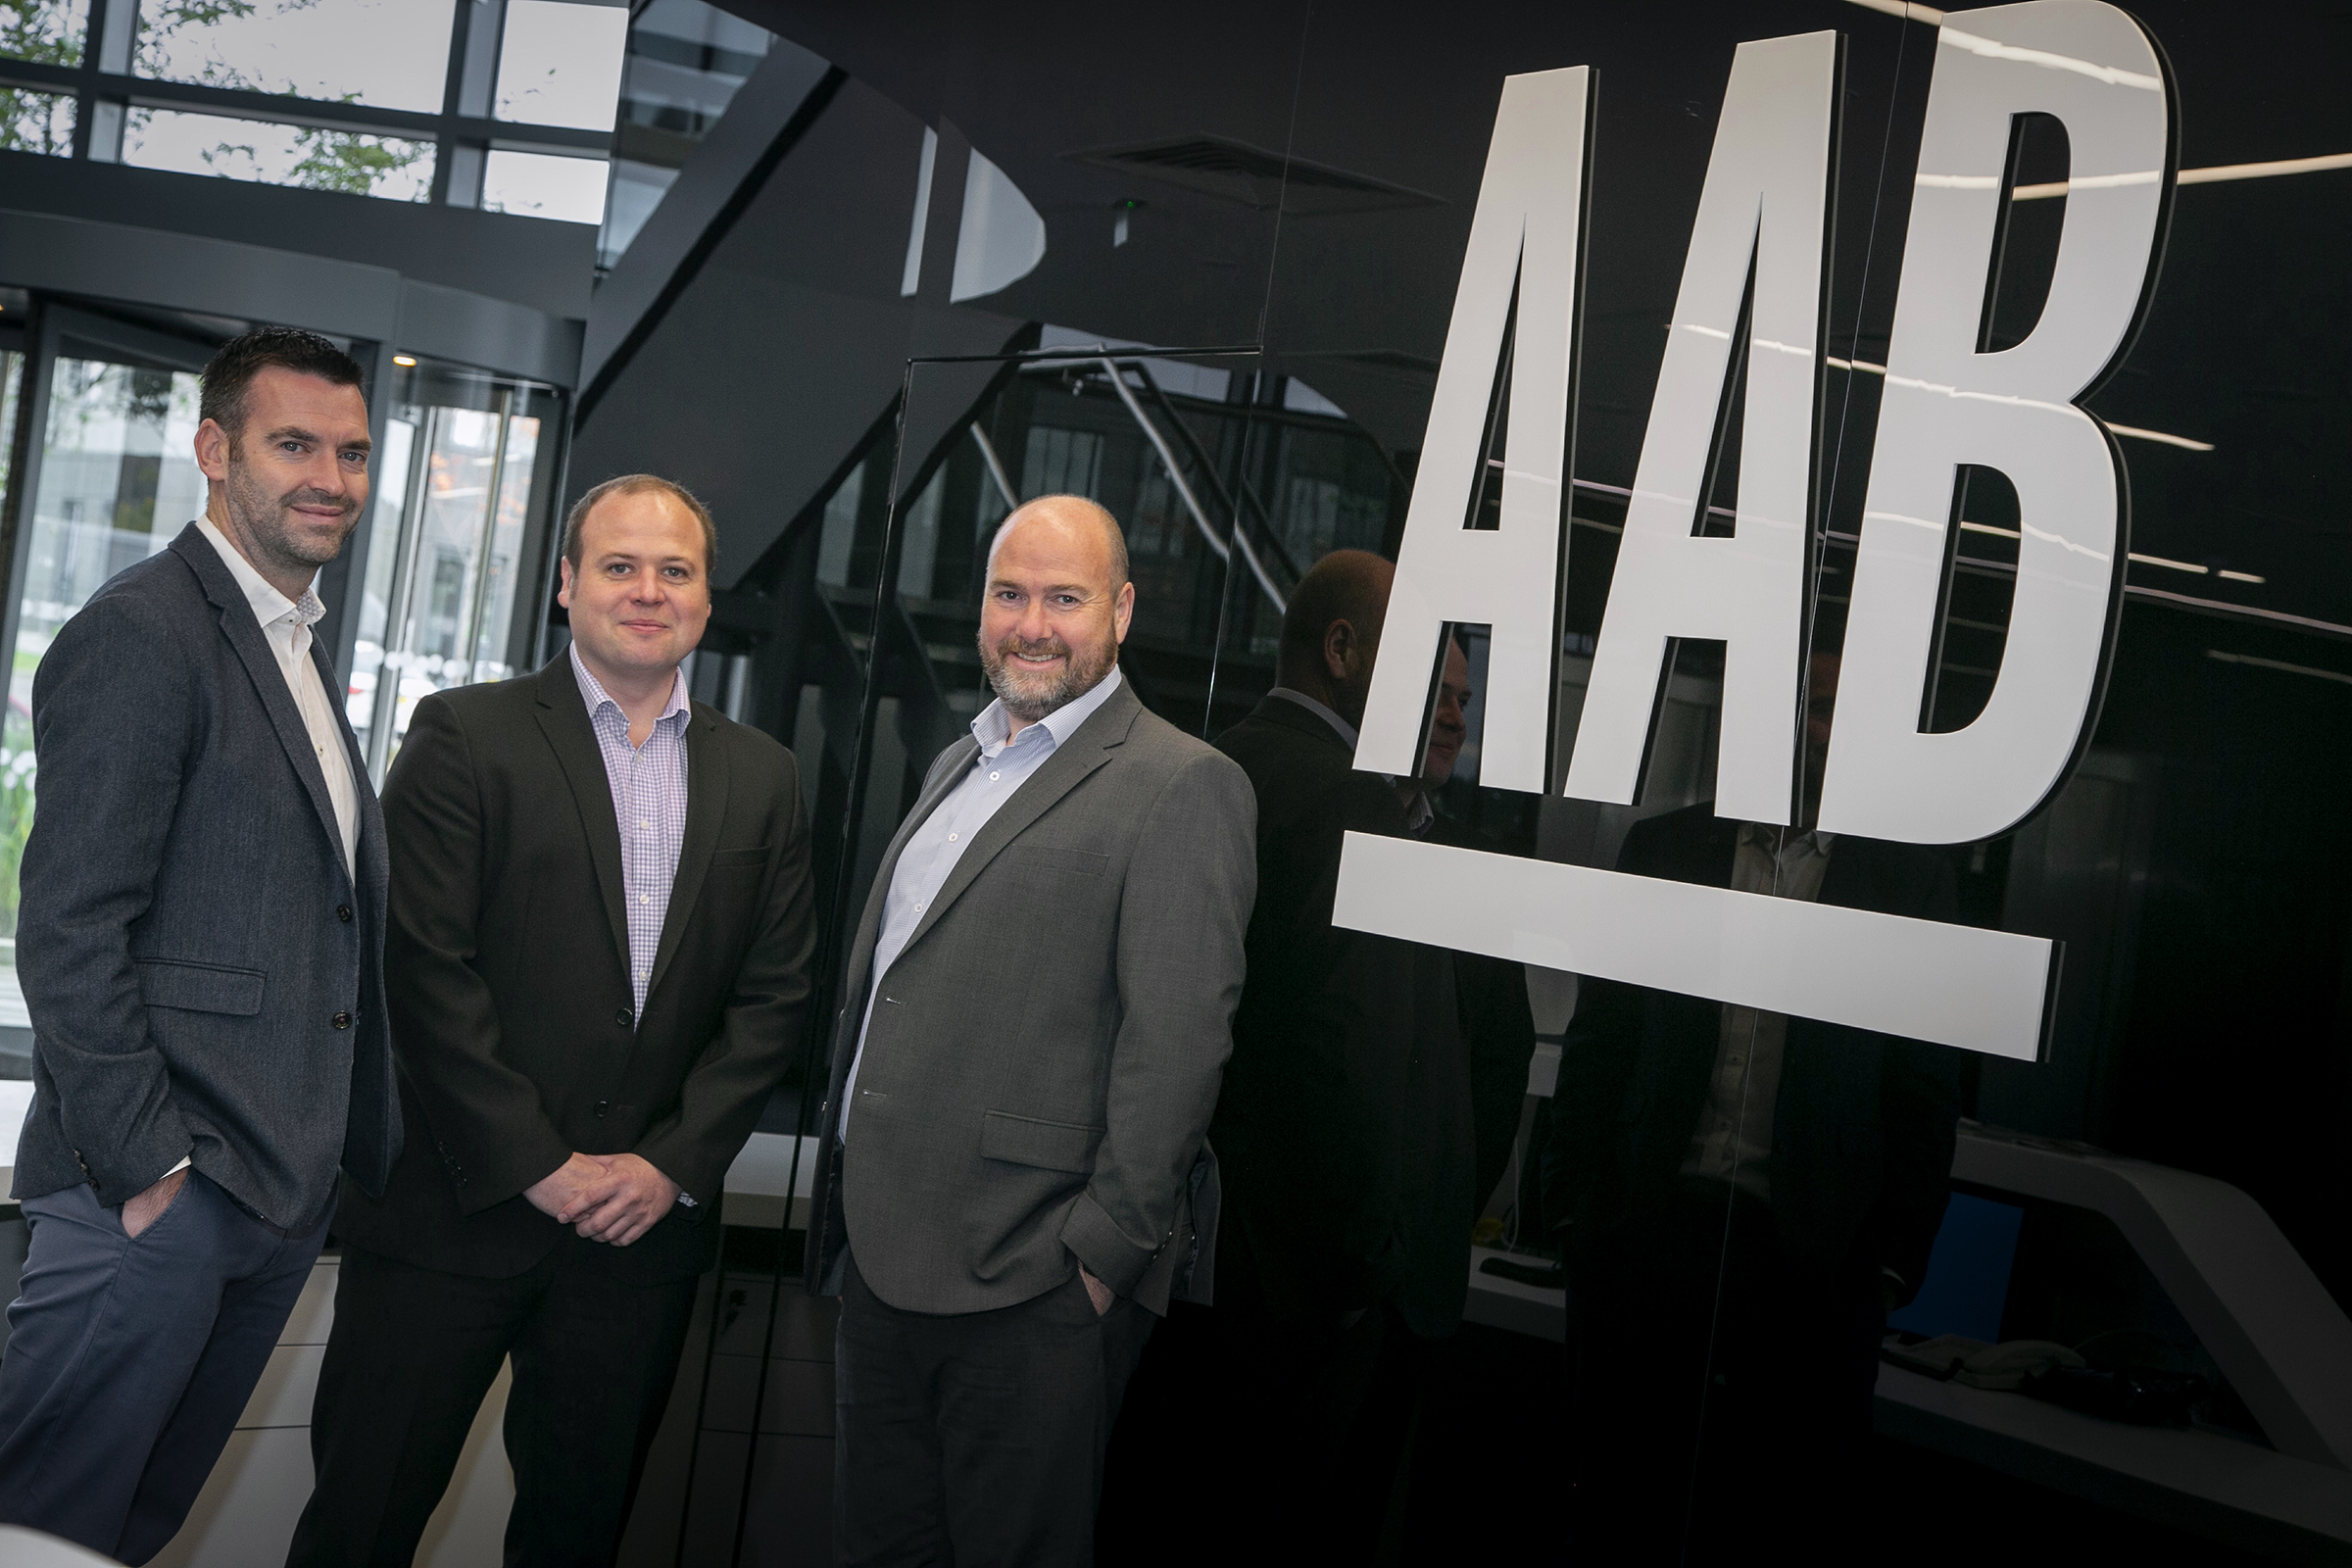 AAB Group announces duo of partner promotions for two who joined as graduates